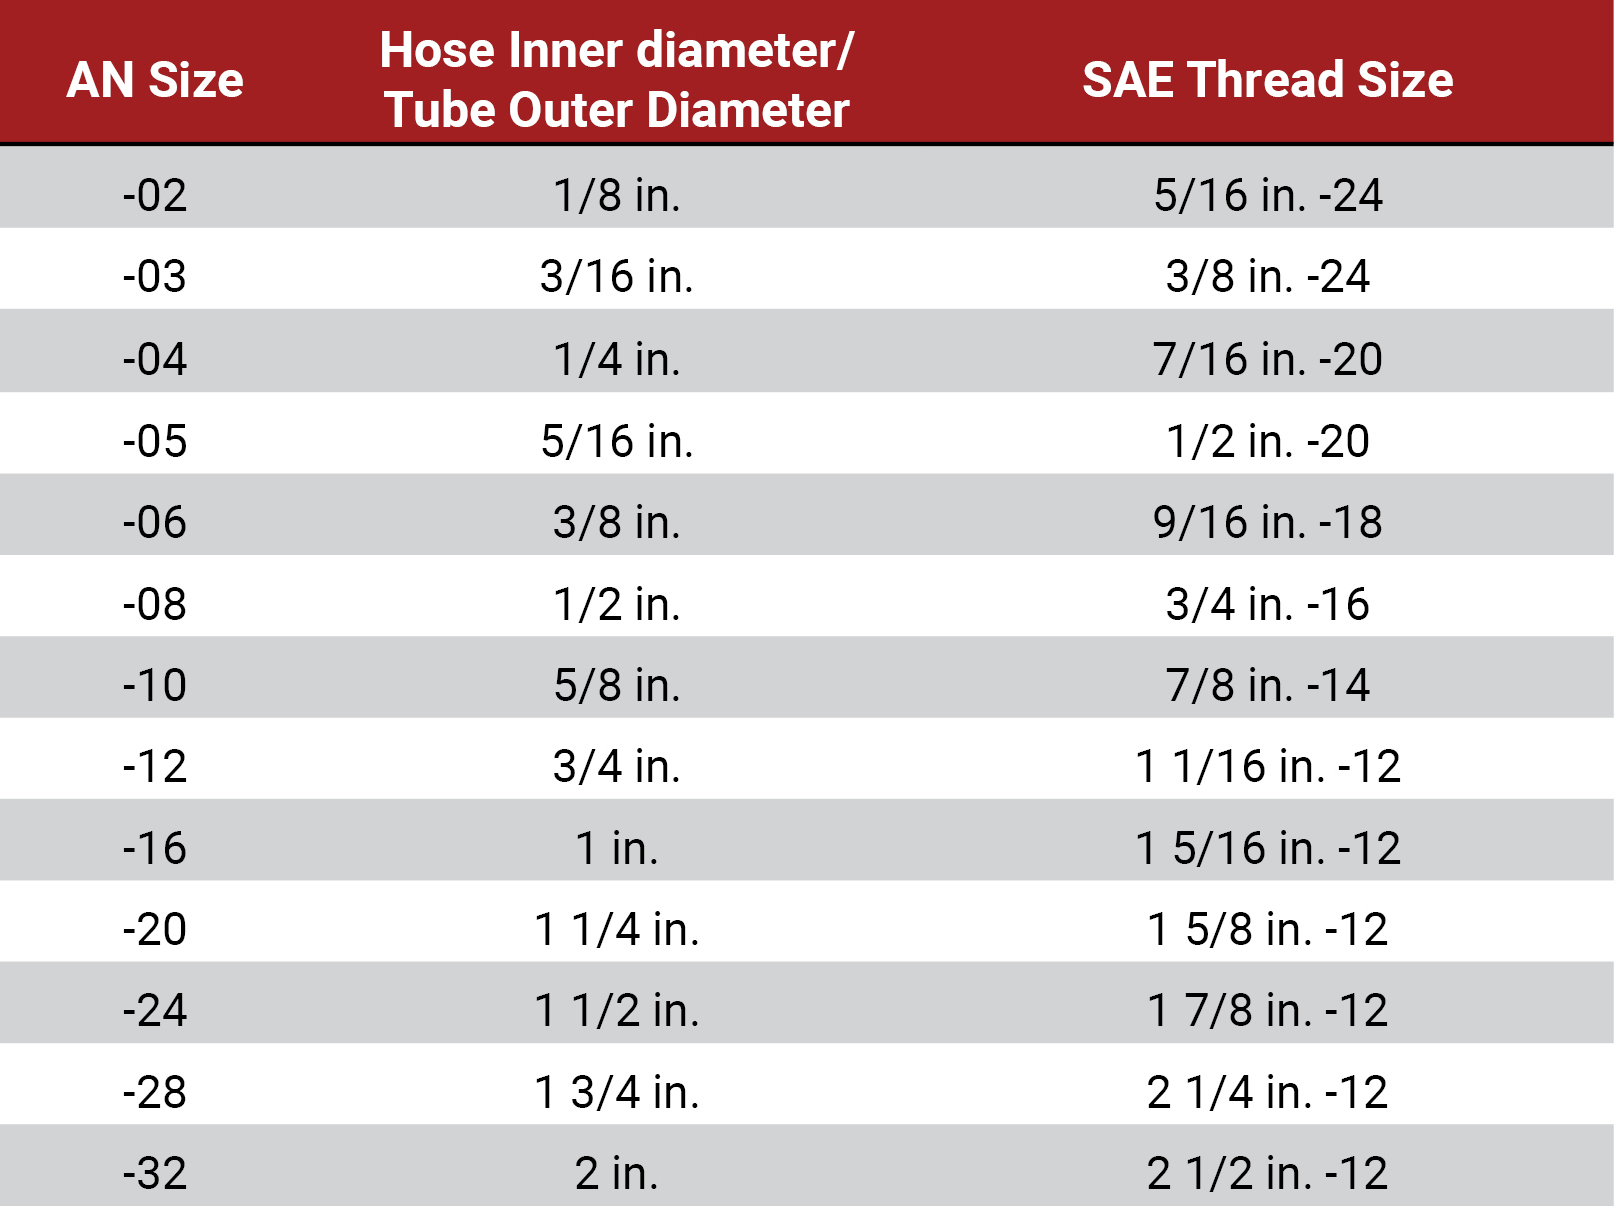 Table showing AN size, Hose inner diameter divided by Tube outer diameter, and SAE Thread Size